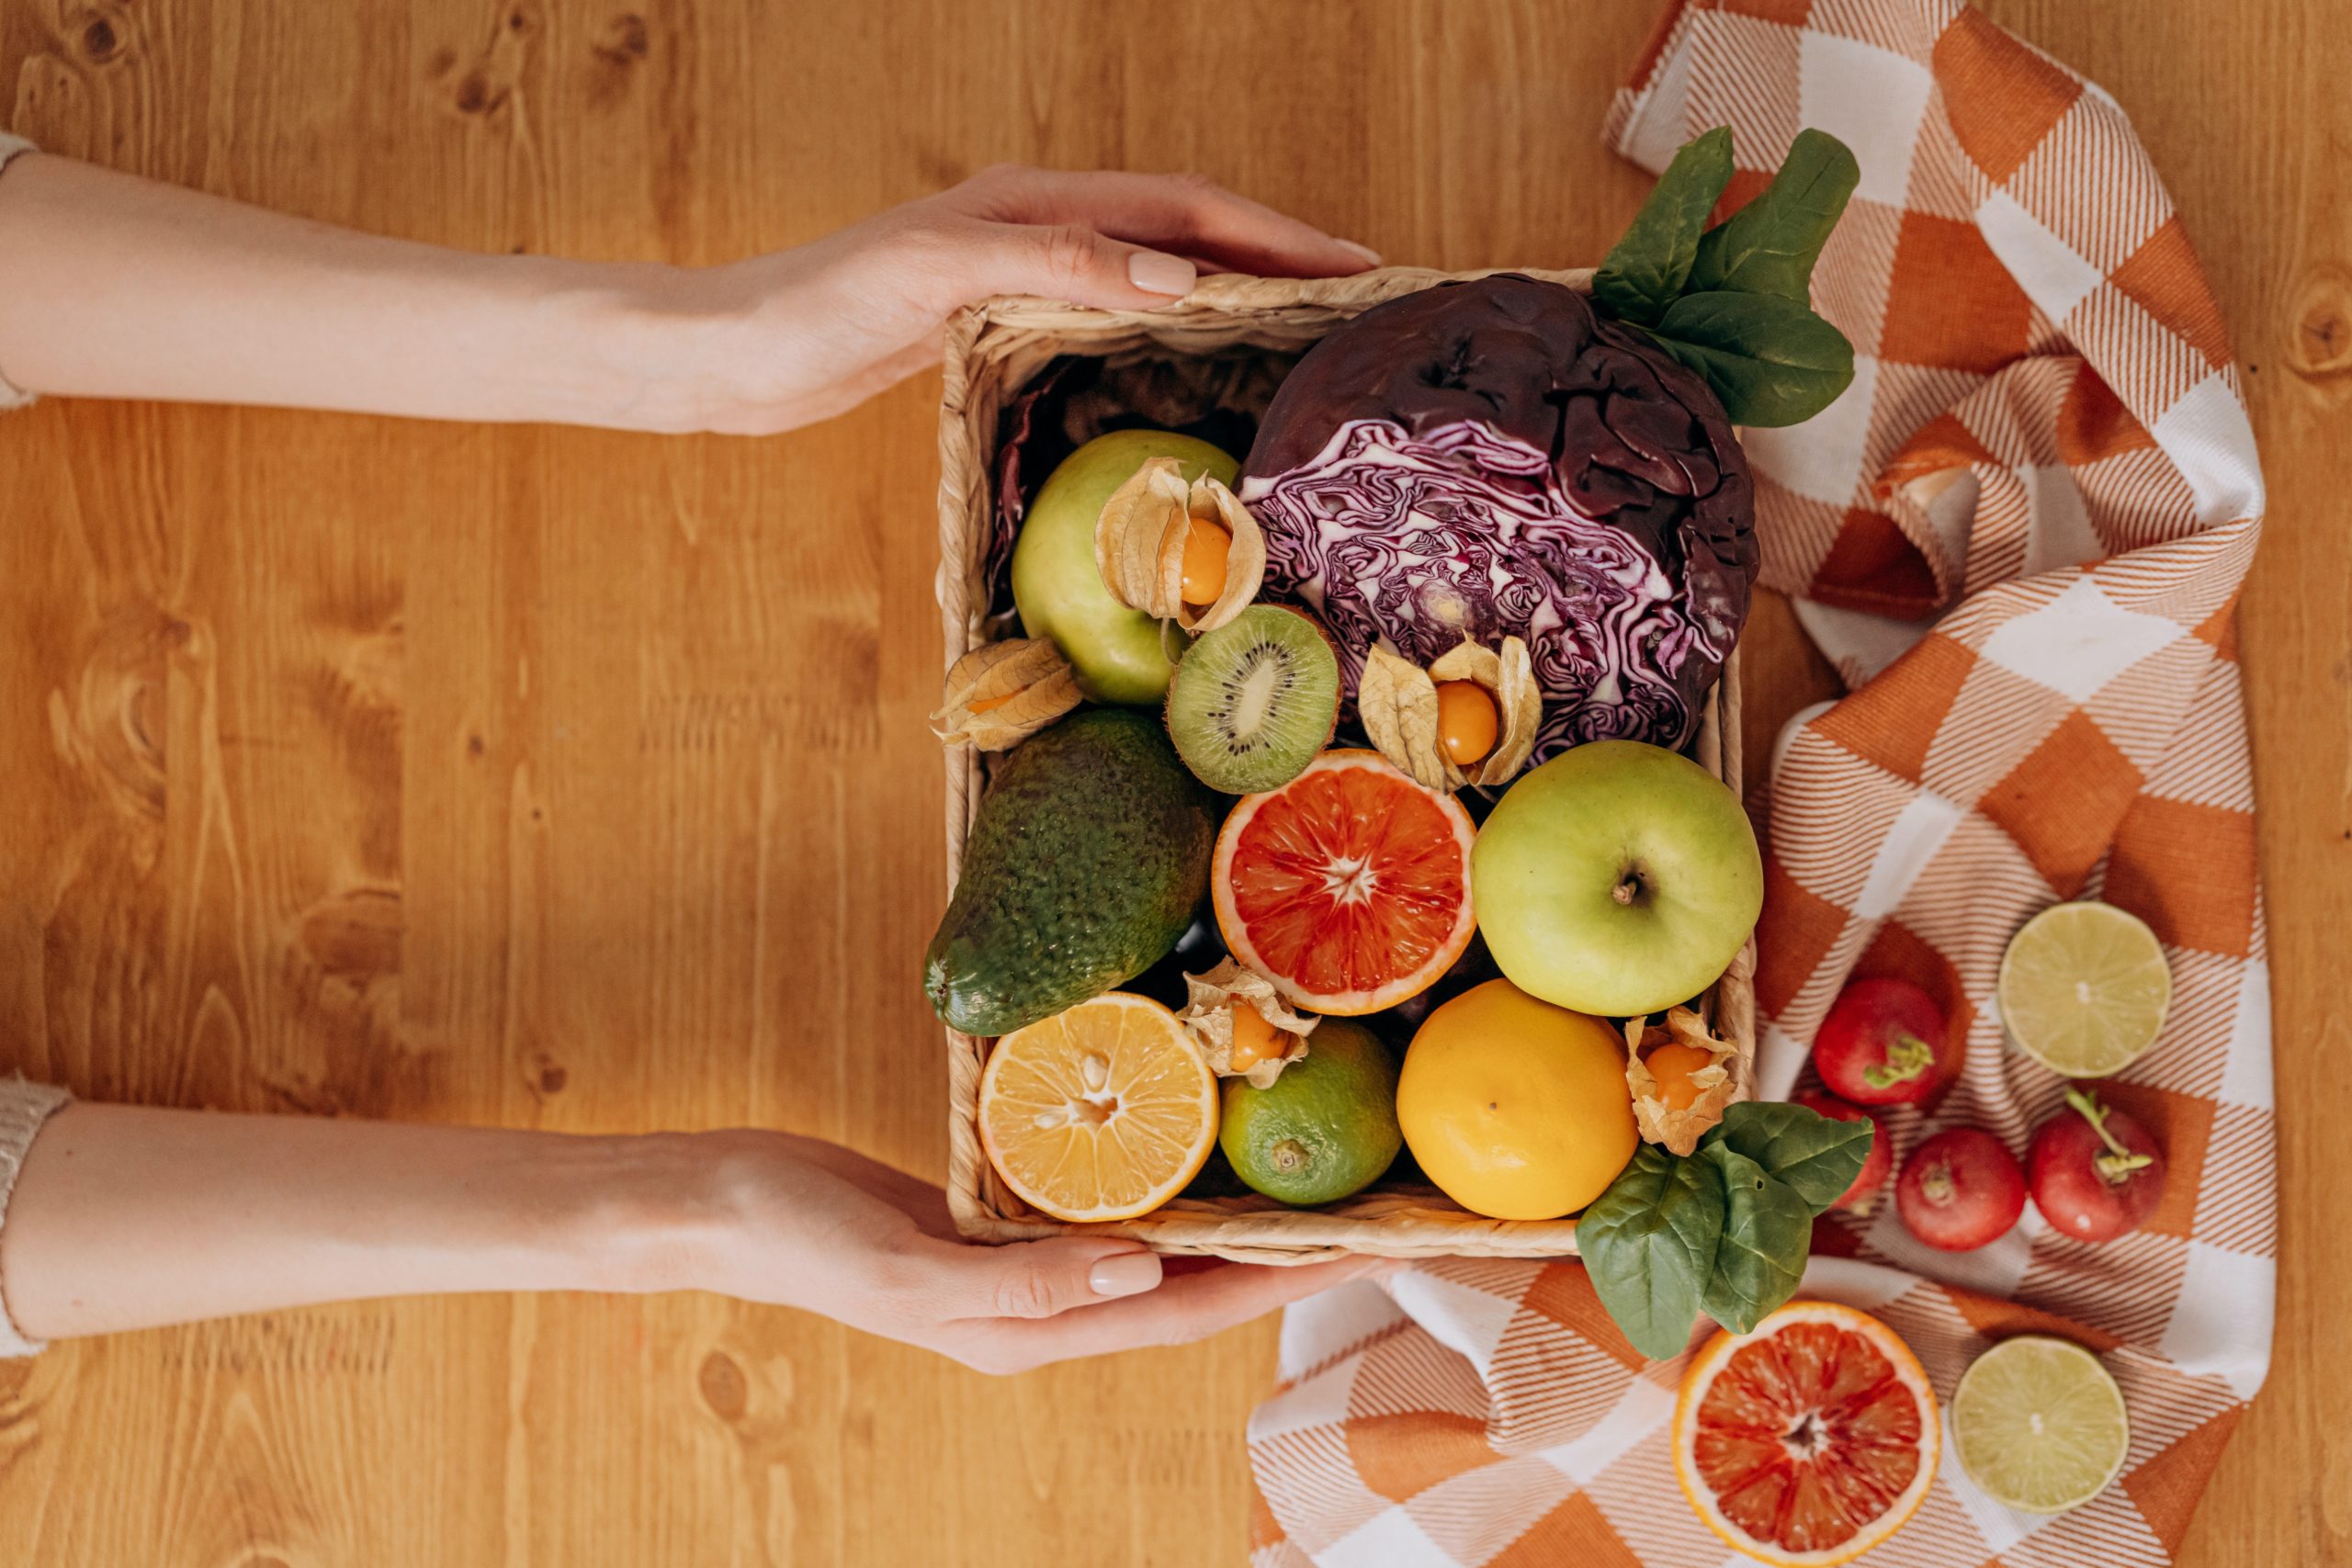 A person's hands are holding a box of fruit and vegetables.